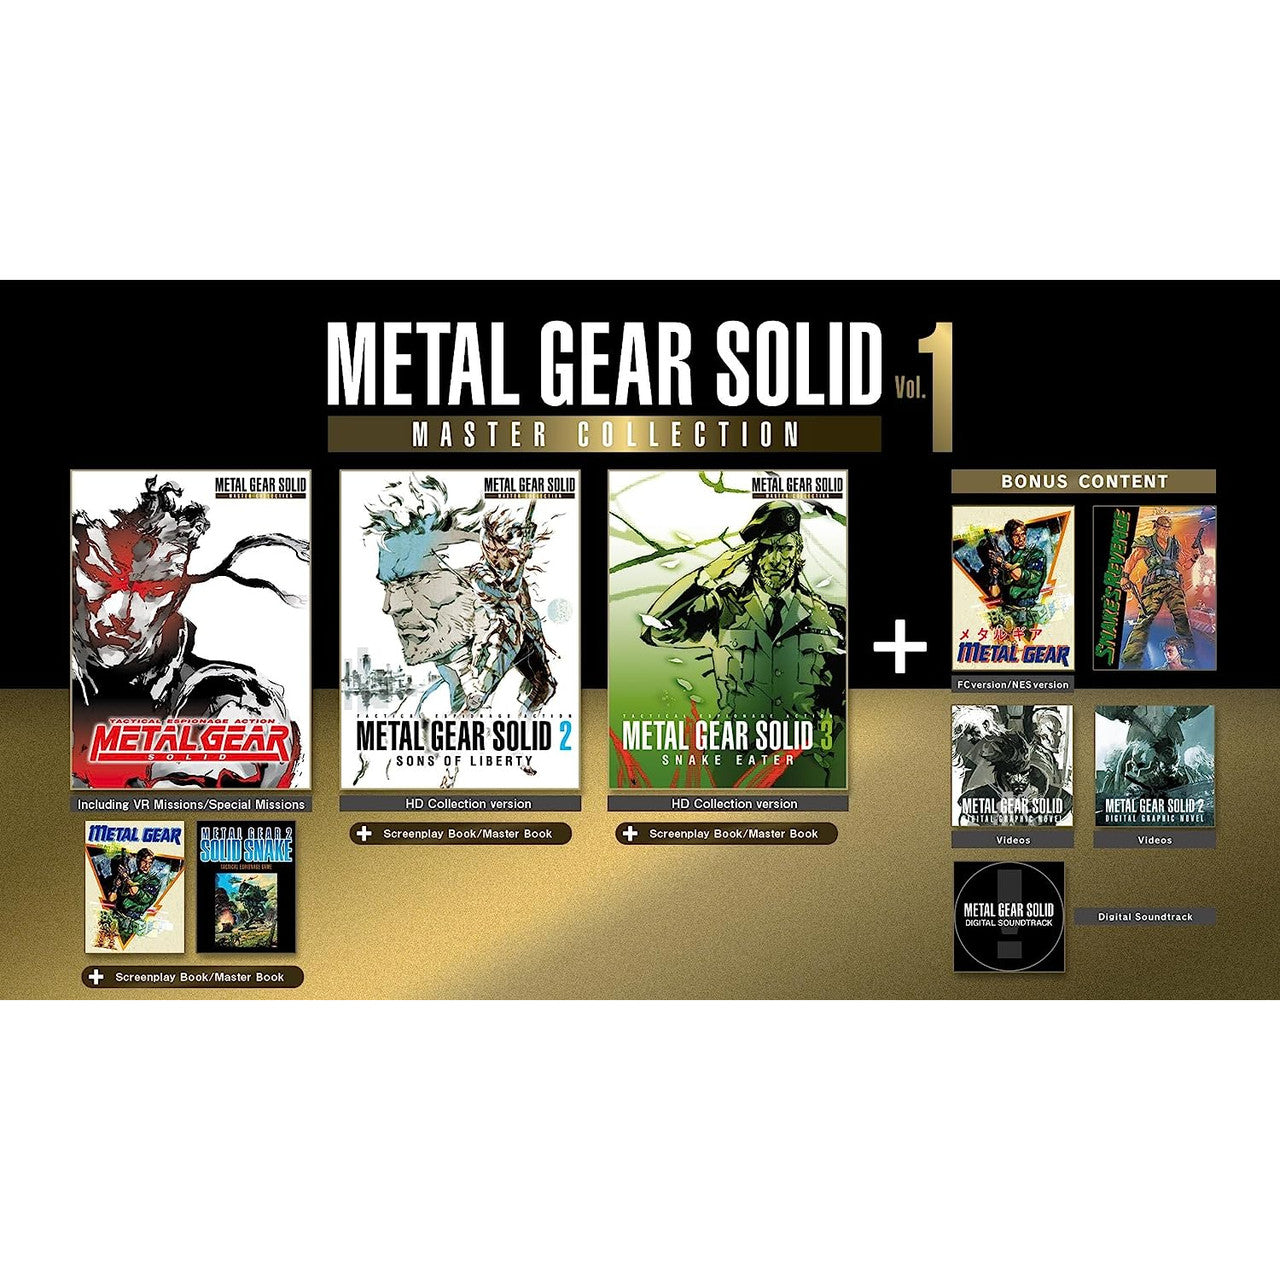 Metal Gear Solid: Master Collection Vol.1 AR Xbox Series X, S CD Key